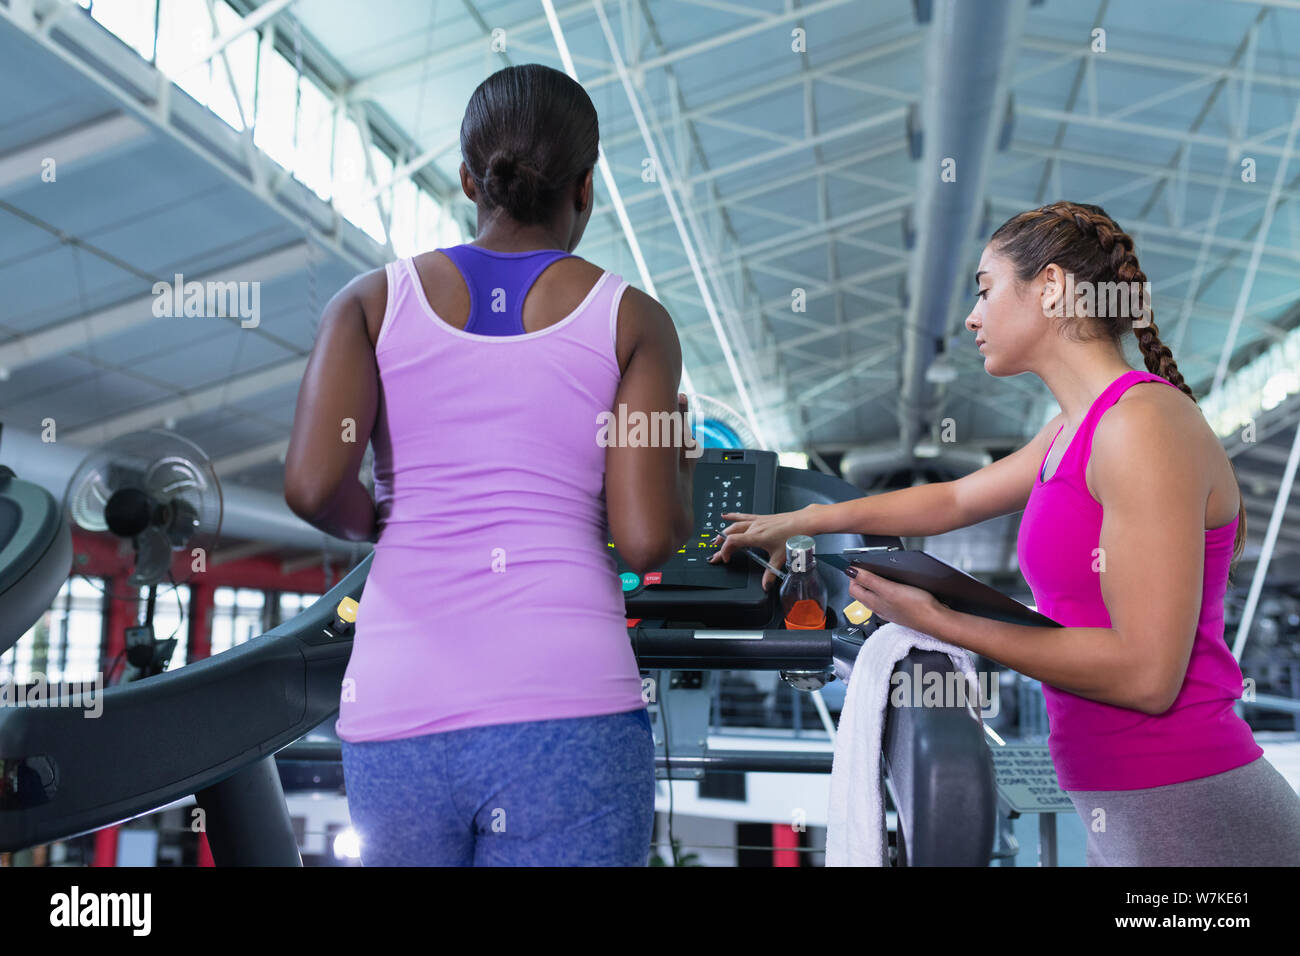 Female trainer assisting woman to work out on treadmill Stock Photo